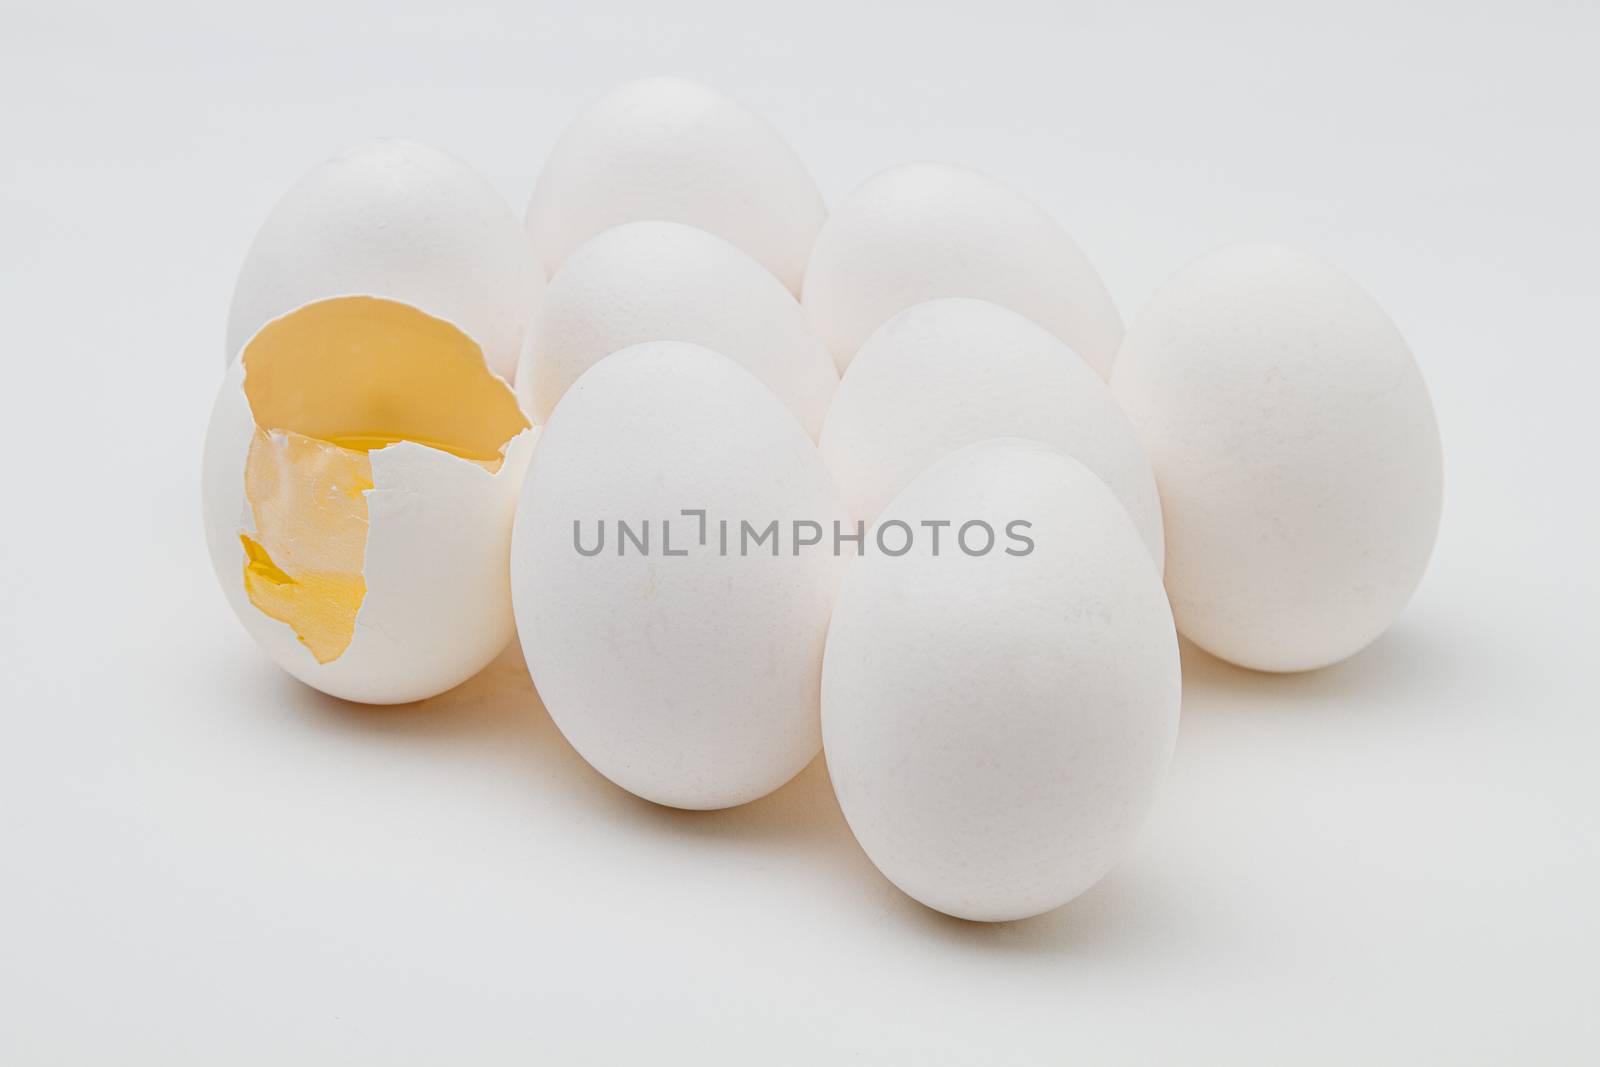 group of eggs with one with a broken shell with yoke inside against a white background